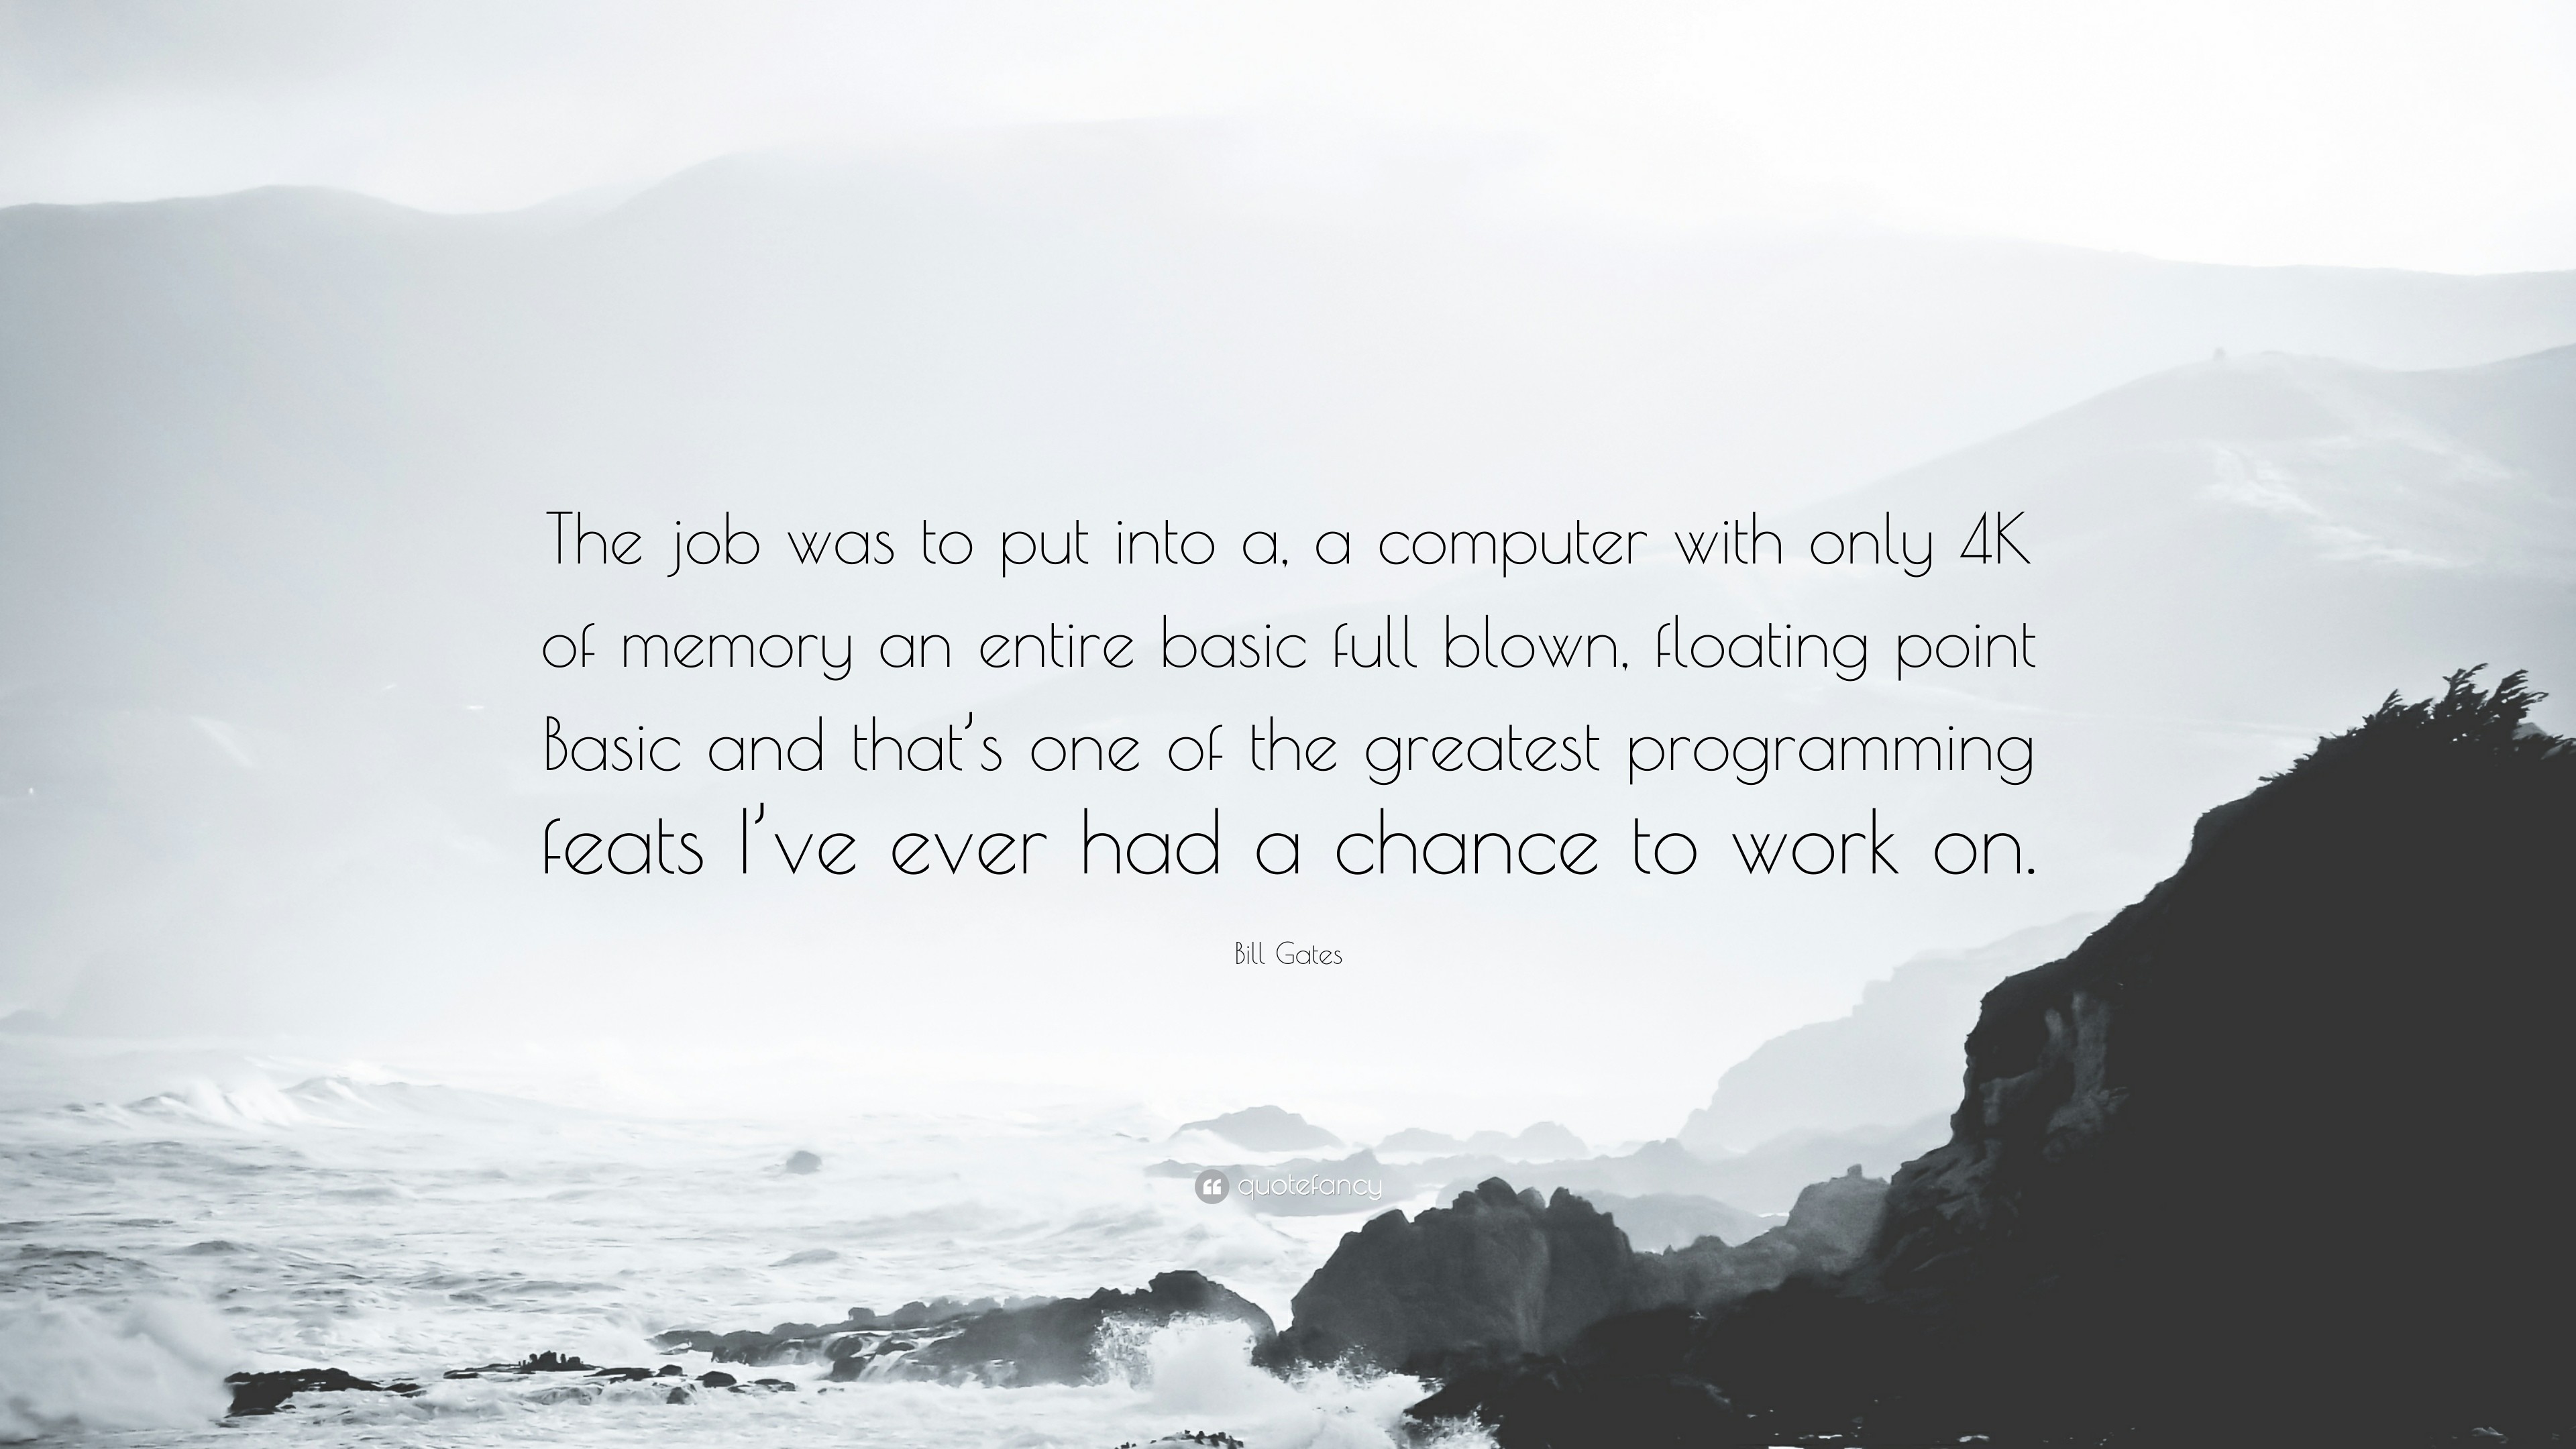 3840x2160 Bill Gates Quote: “The job was to put into a, a computer with